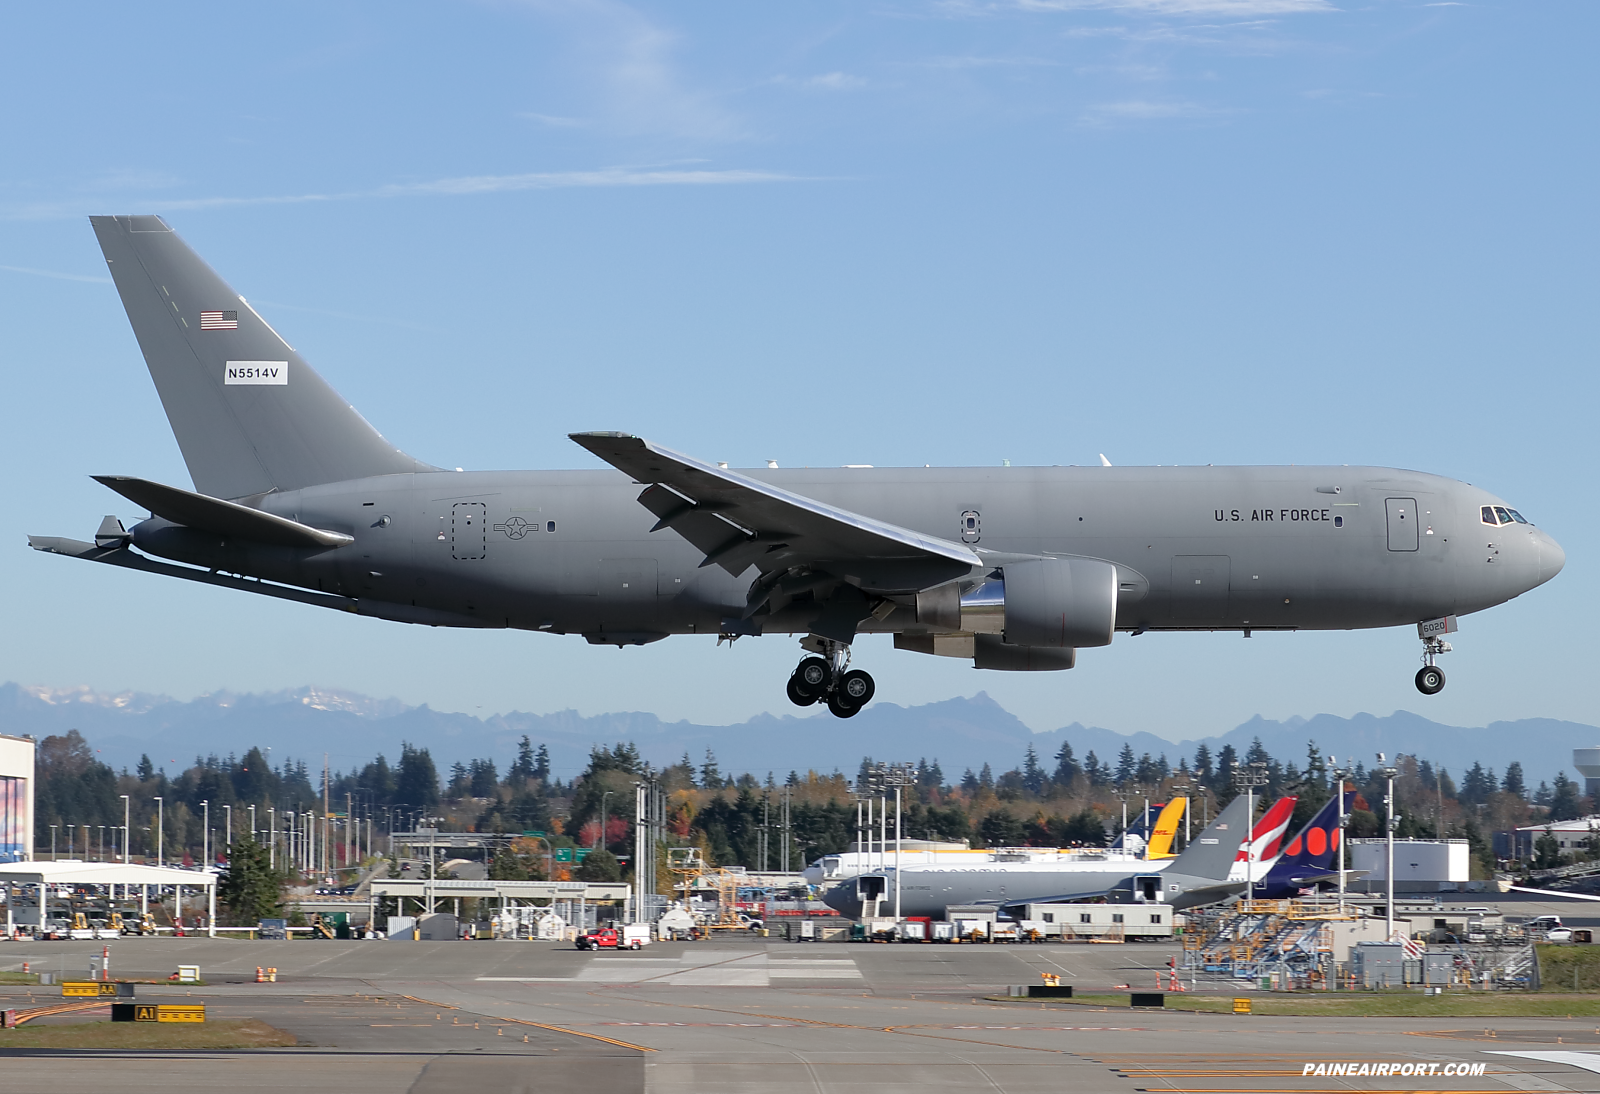 KC-46A 16-46020 at KPAE Paine Field